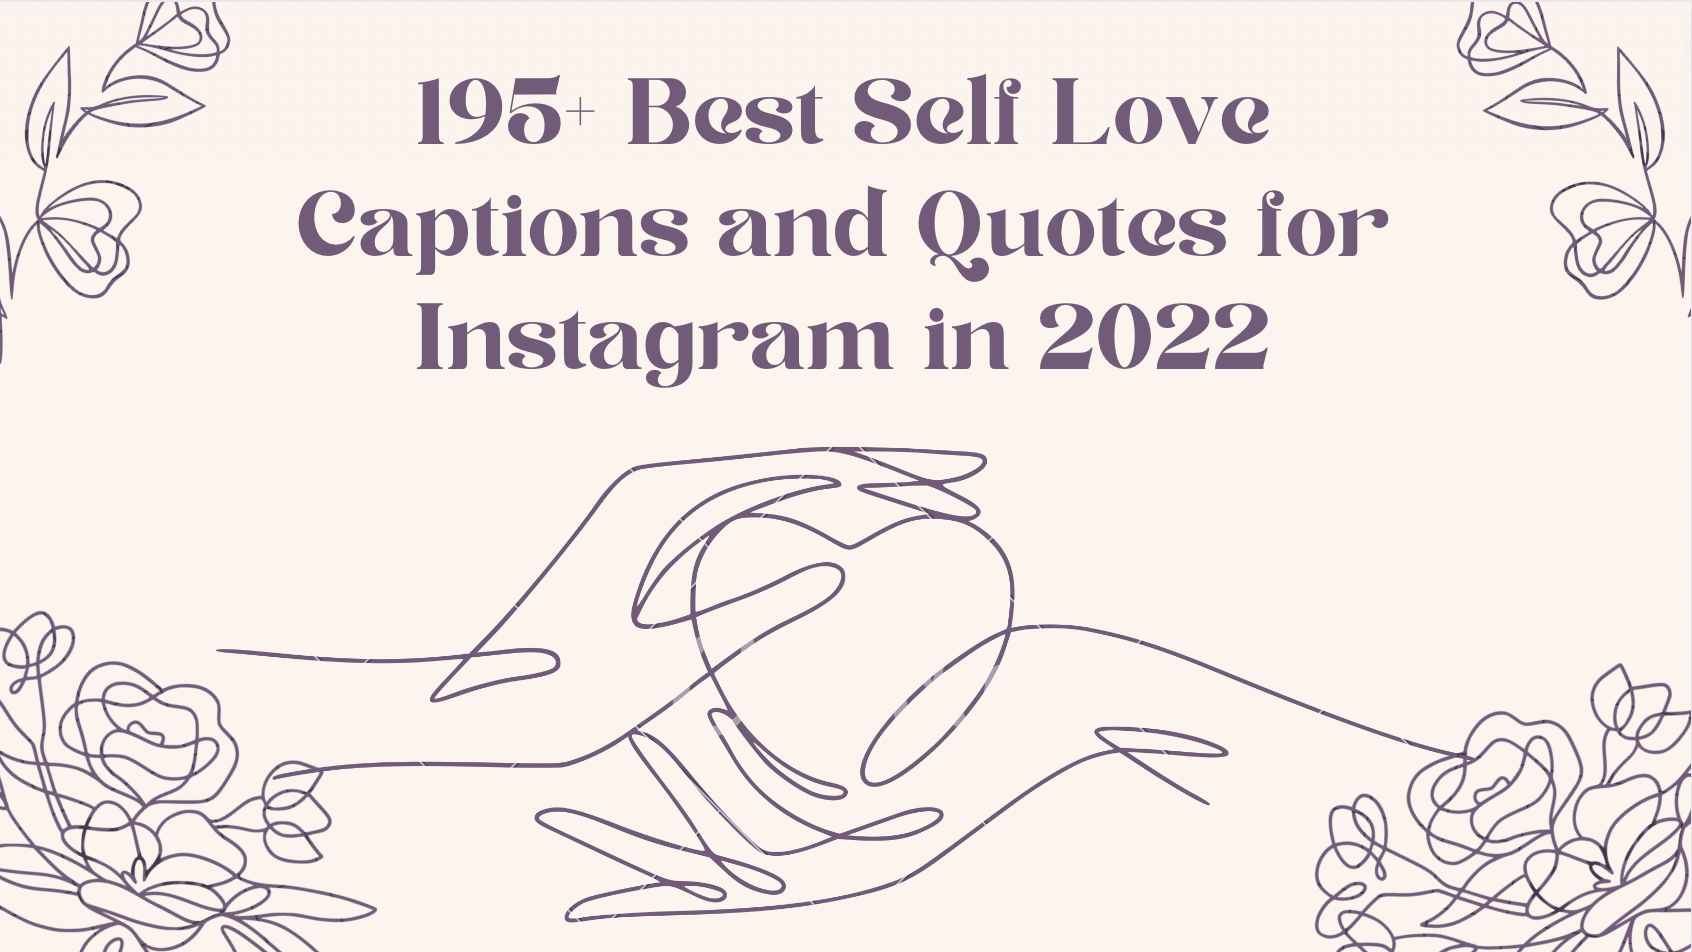 195+ Best Self Love Captions and Quotes for Instagram in 2022 [Free to Copy]